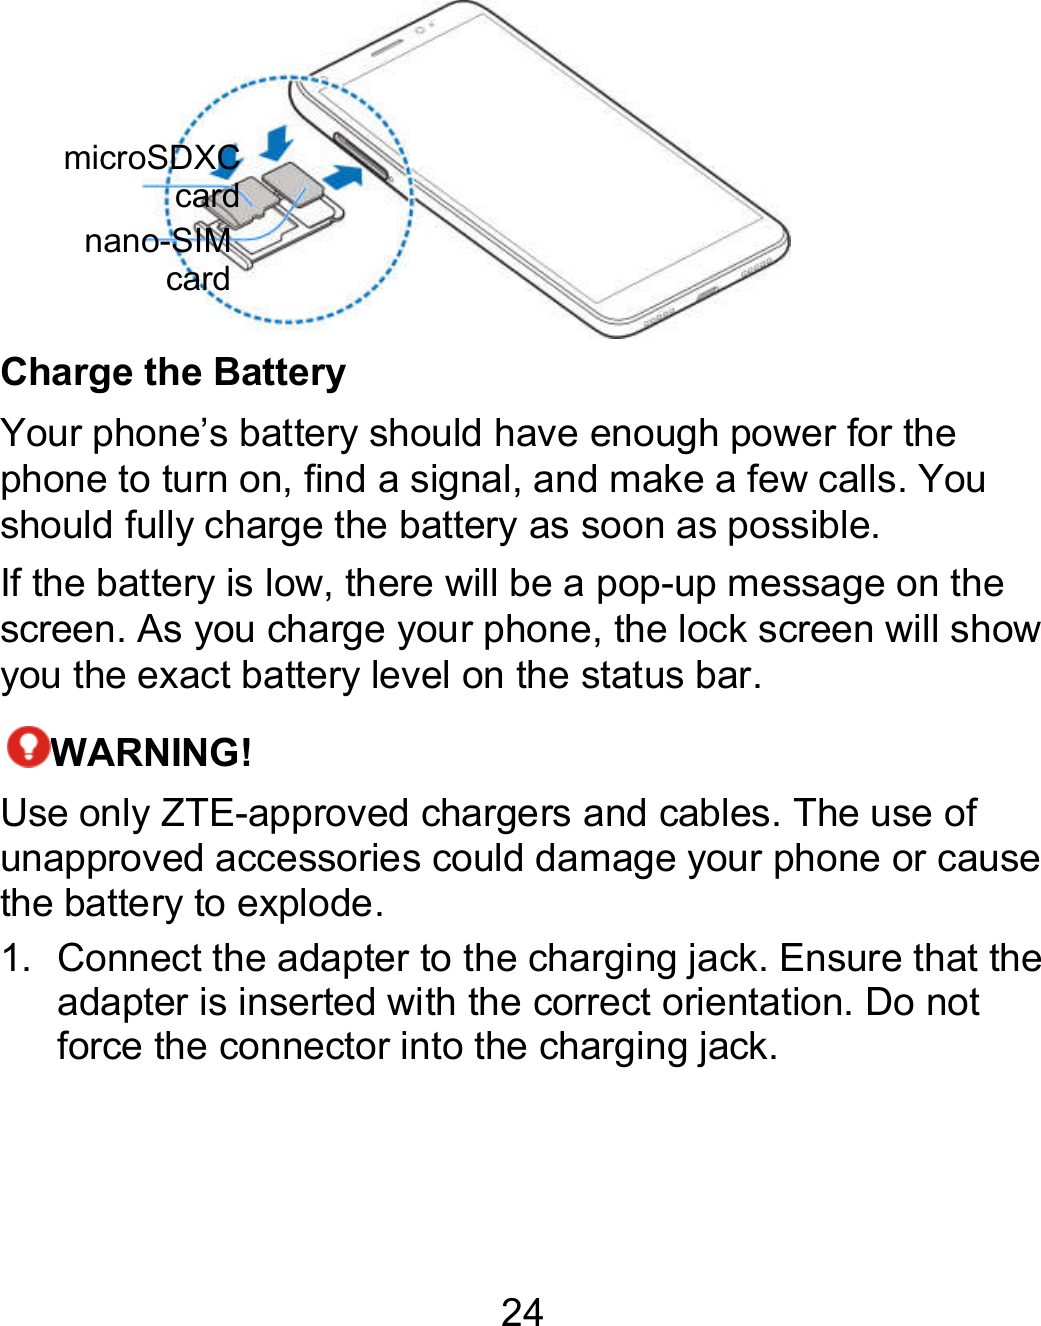 24  Charge the Battery Your phone’s battery should have enough power for the phone to turn on, find a signal, and make a few calls. You should fully charge the battery as soon as possible. If the battery is low, there will be a pop-up message on the screen. As you charge your phone, the lock screen will show you the exact battery level on the status bar. WARNING! Use only ZTE-approved chargers and cables. The use of unapproved accessories could damage your phone or cause the battery to explode. 1.  Connect the adapter to the charging jack. Ensure that the adapter is inserted with the correct orientation. Do not force the connector into the charging jack. microSDXC cardnano-SIM card 